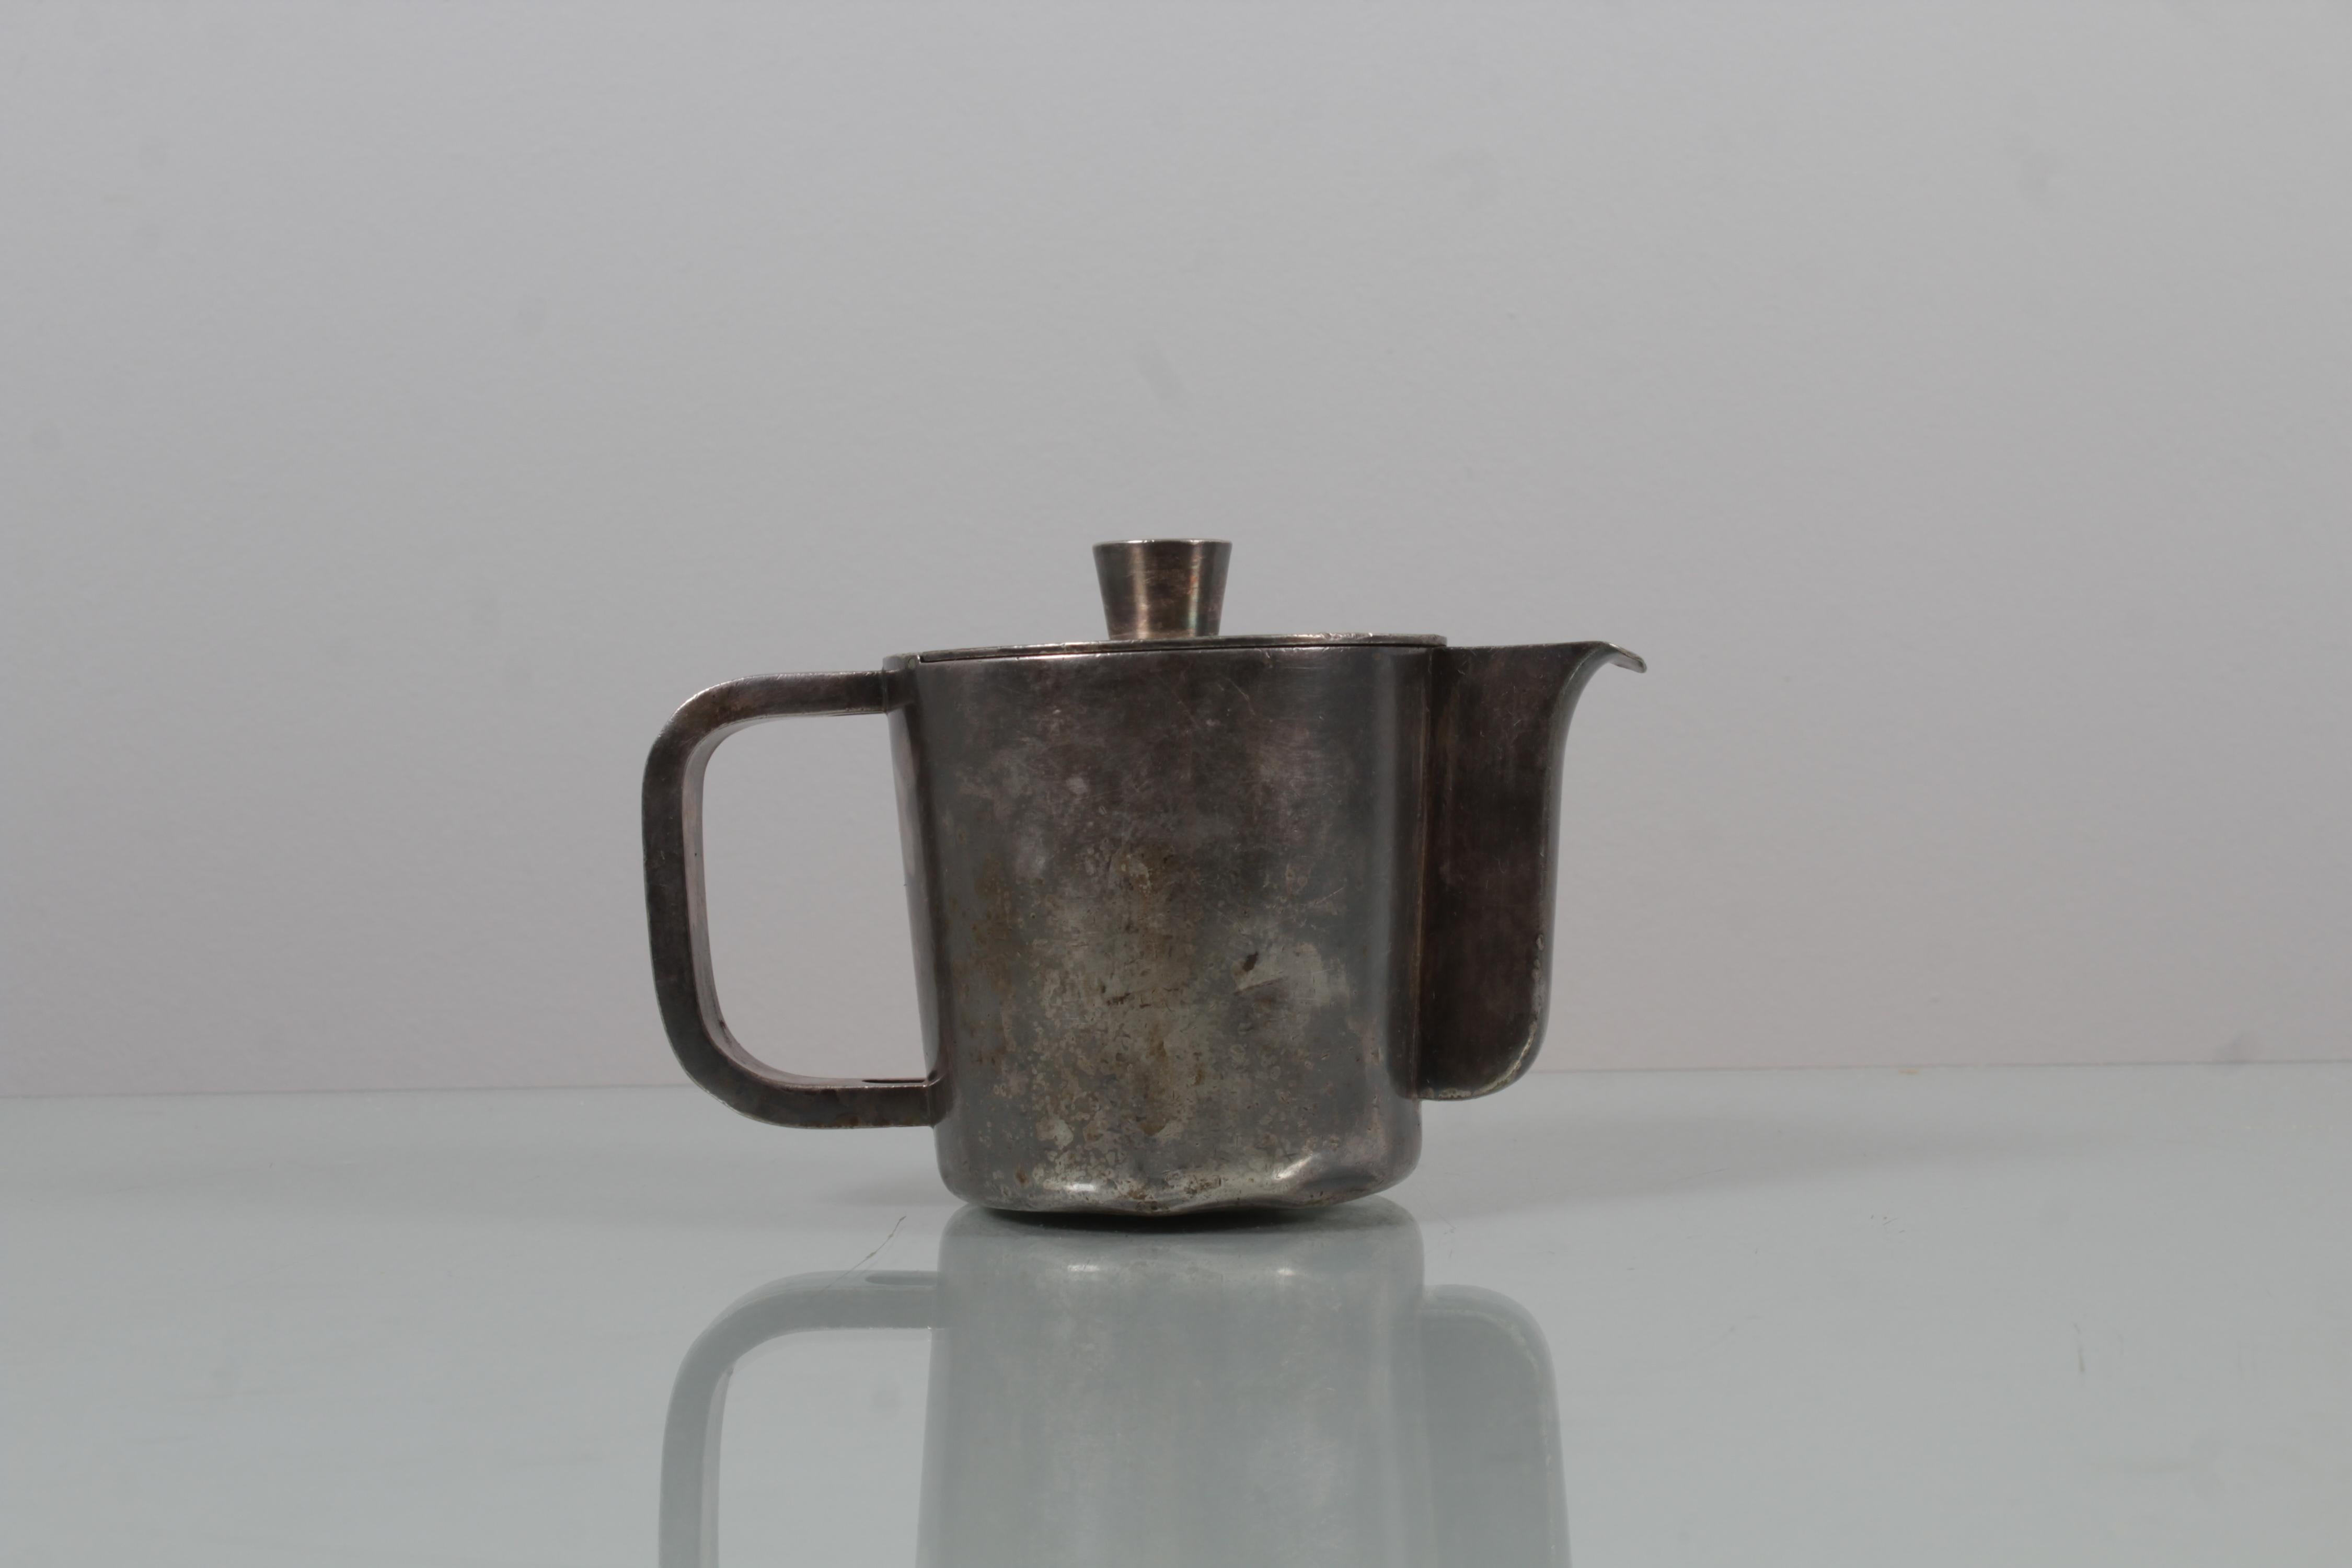 Prestigious teapot for Gran Hotel breakfast set, in nickel silver, design by Gio Ponti, 1938, produced by Krupp Milano. Some dents and natural signs of use and age on the surface. On the bottom engraved the trademark with the wording 